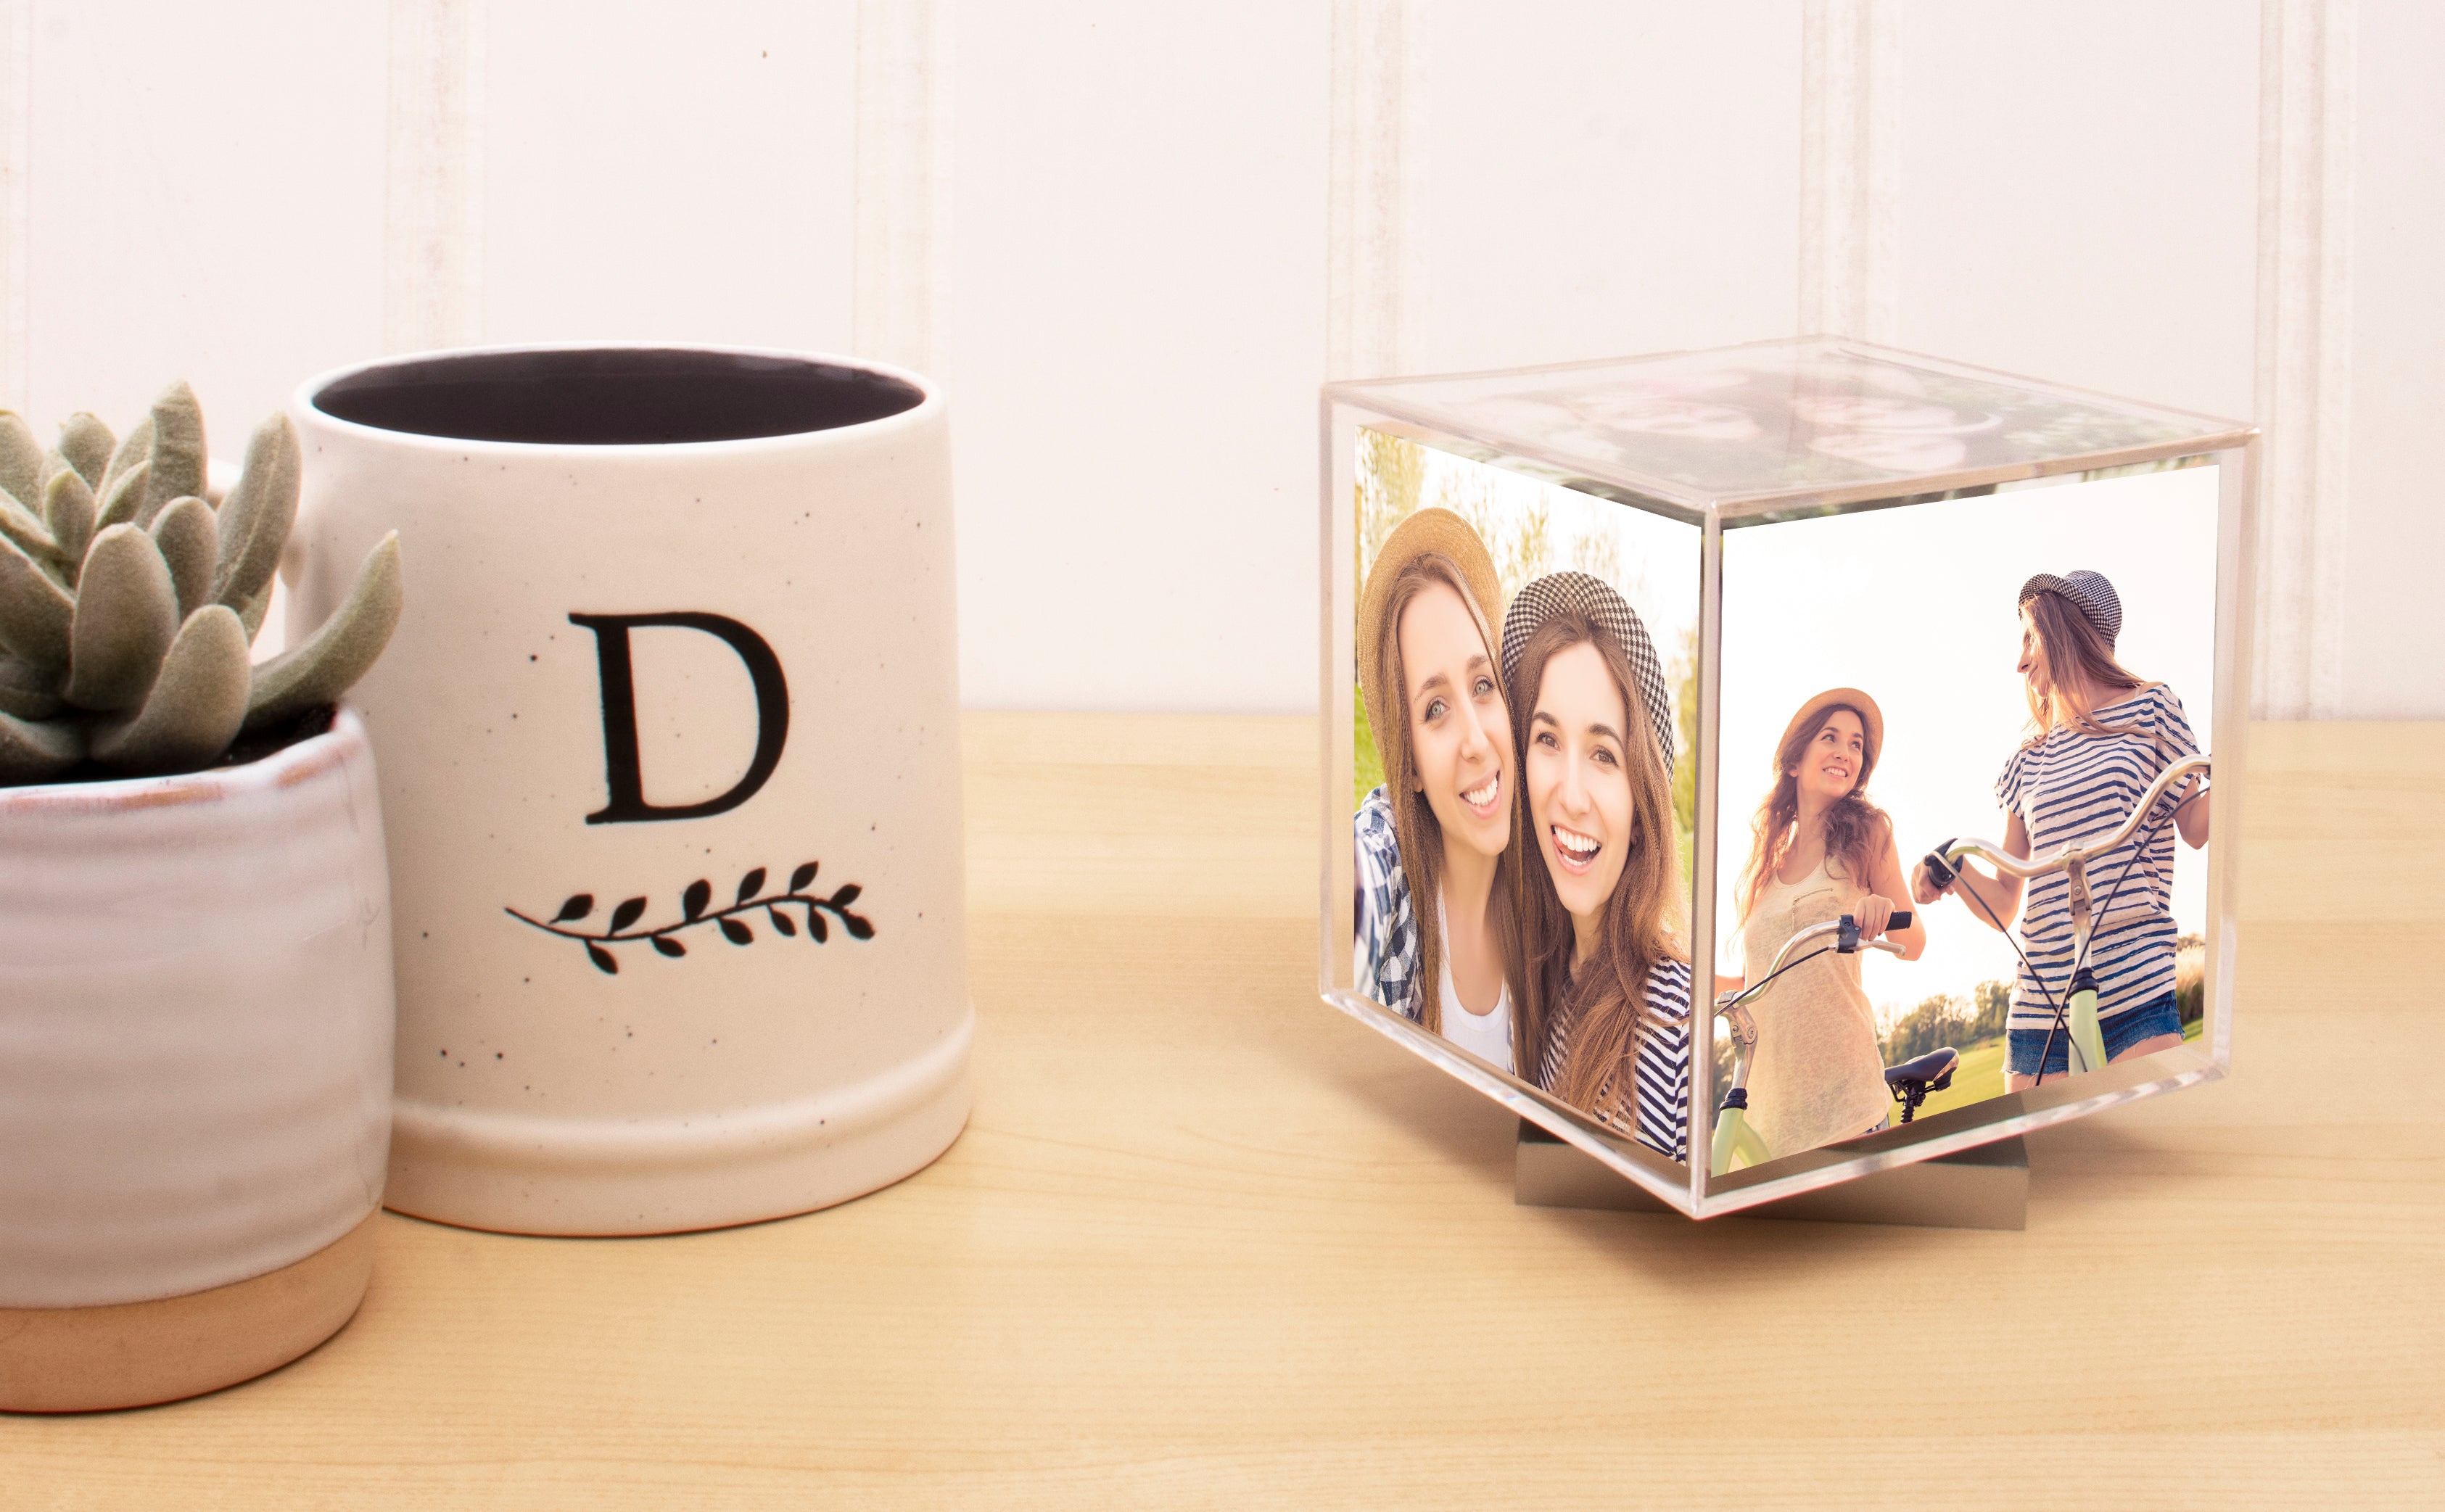 Spinning Photo Cubes